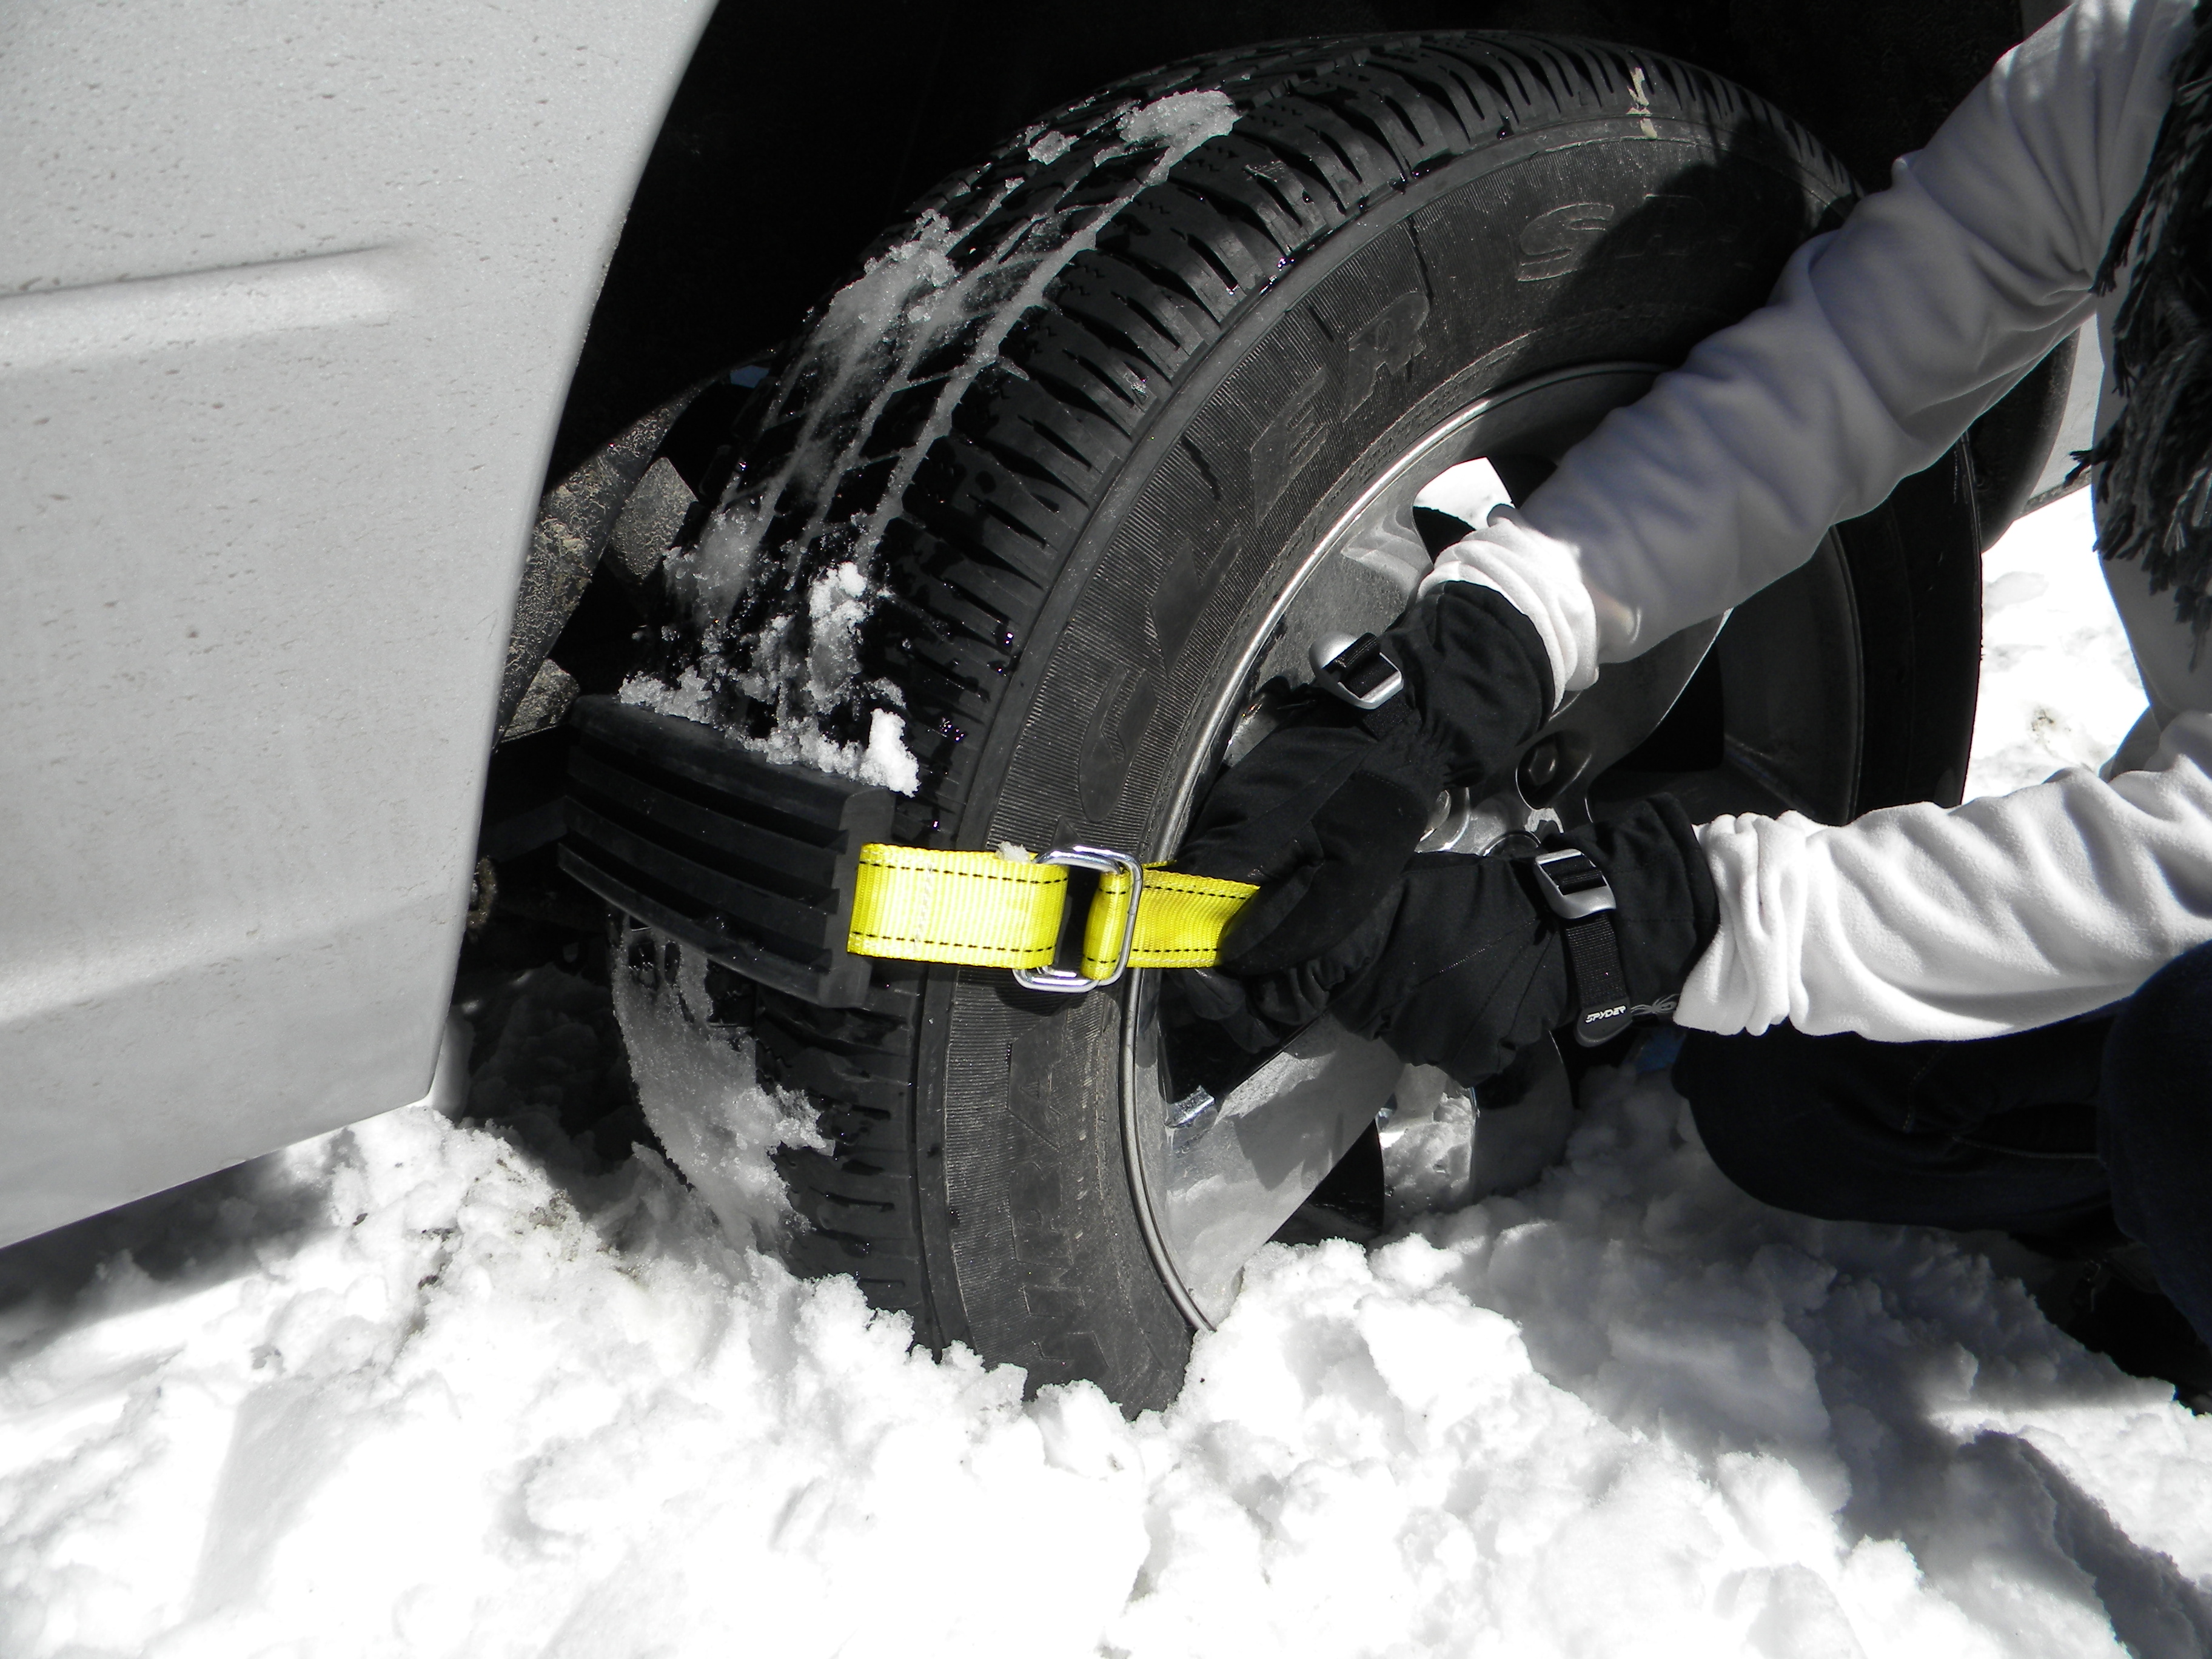 Trac-Grabber's traction bar connects with the surface to lift and "unstuck" tires from snow and mud.